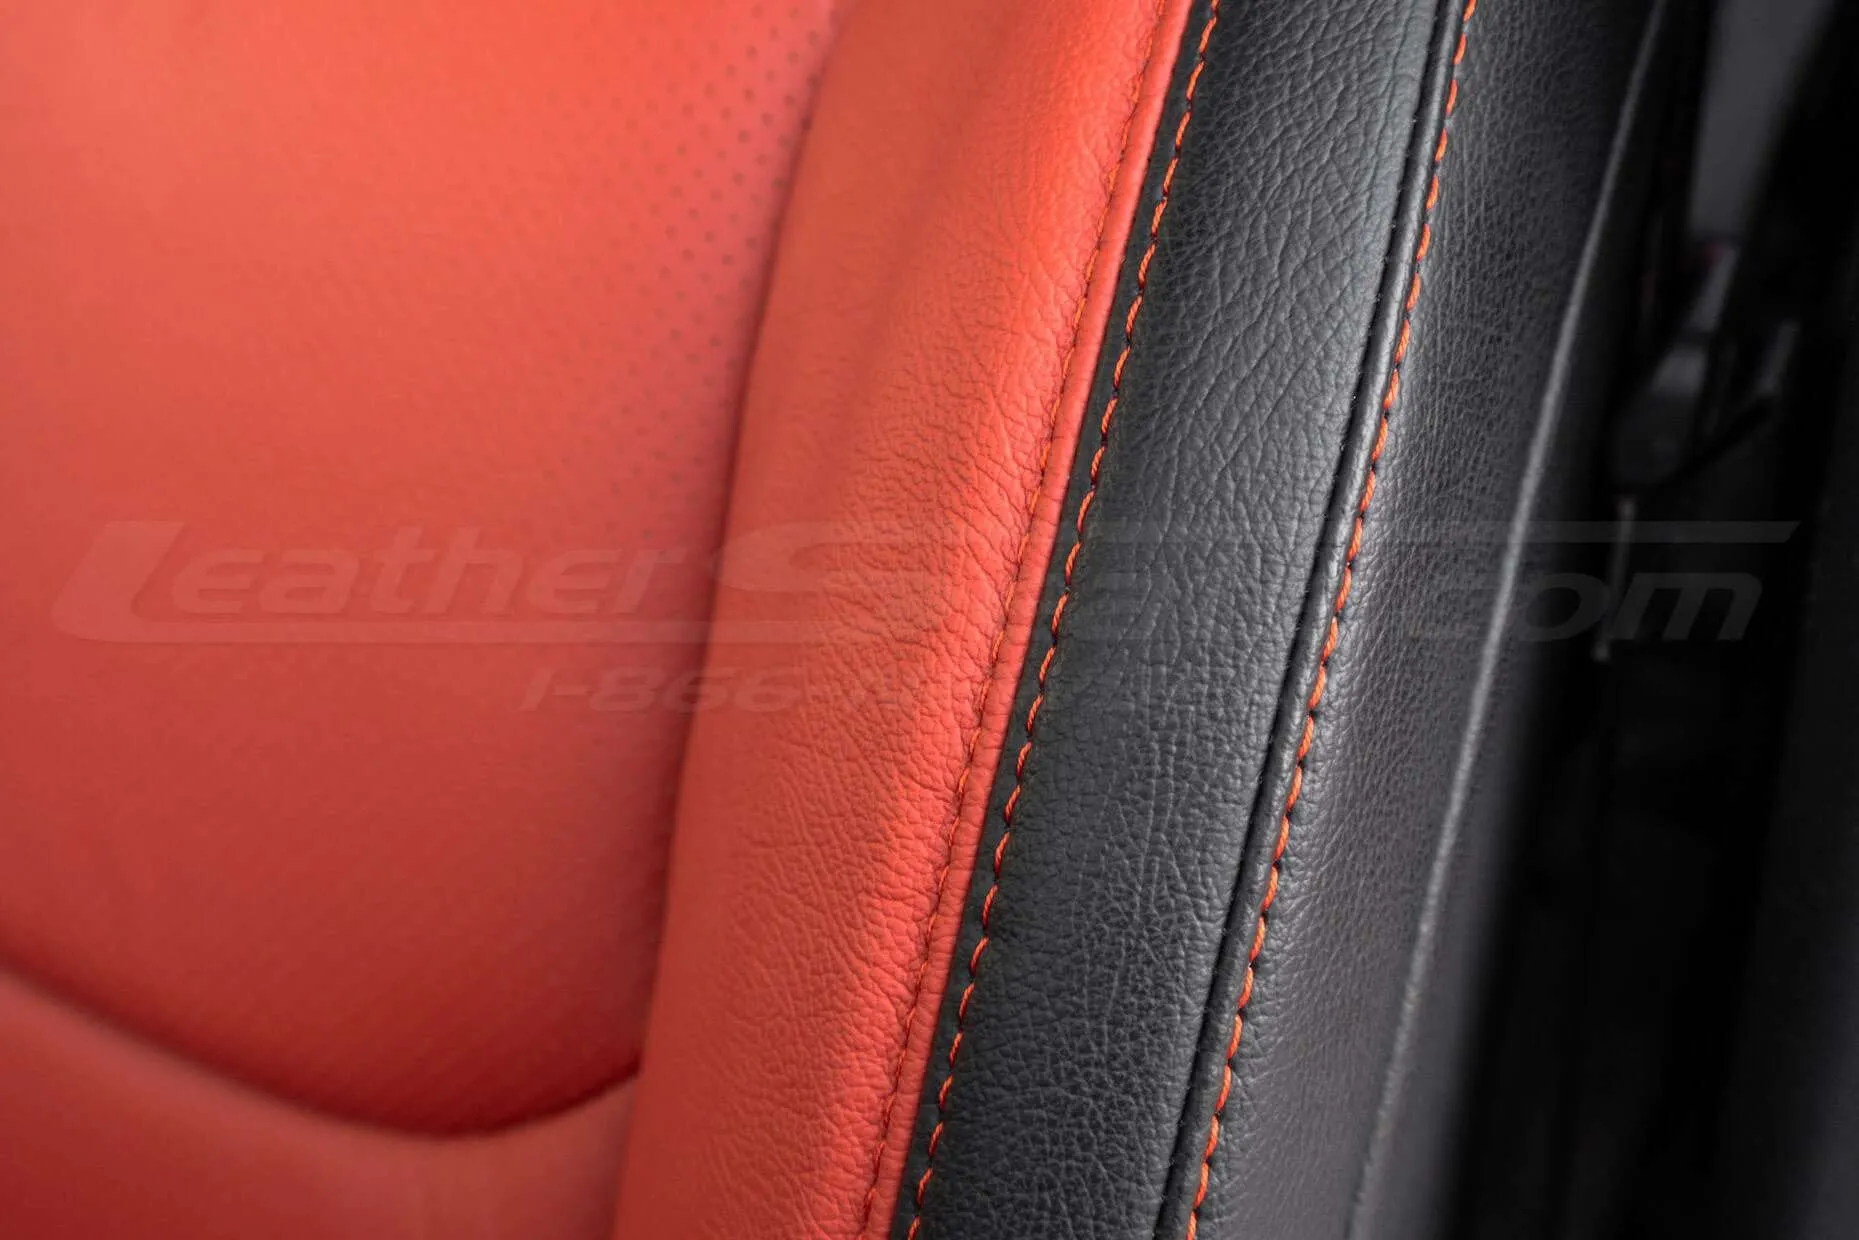 Contrasting double-stitching in Tangerine on Black leather - close-up